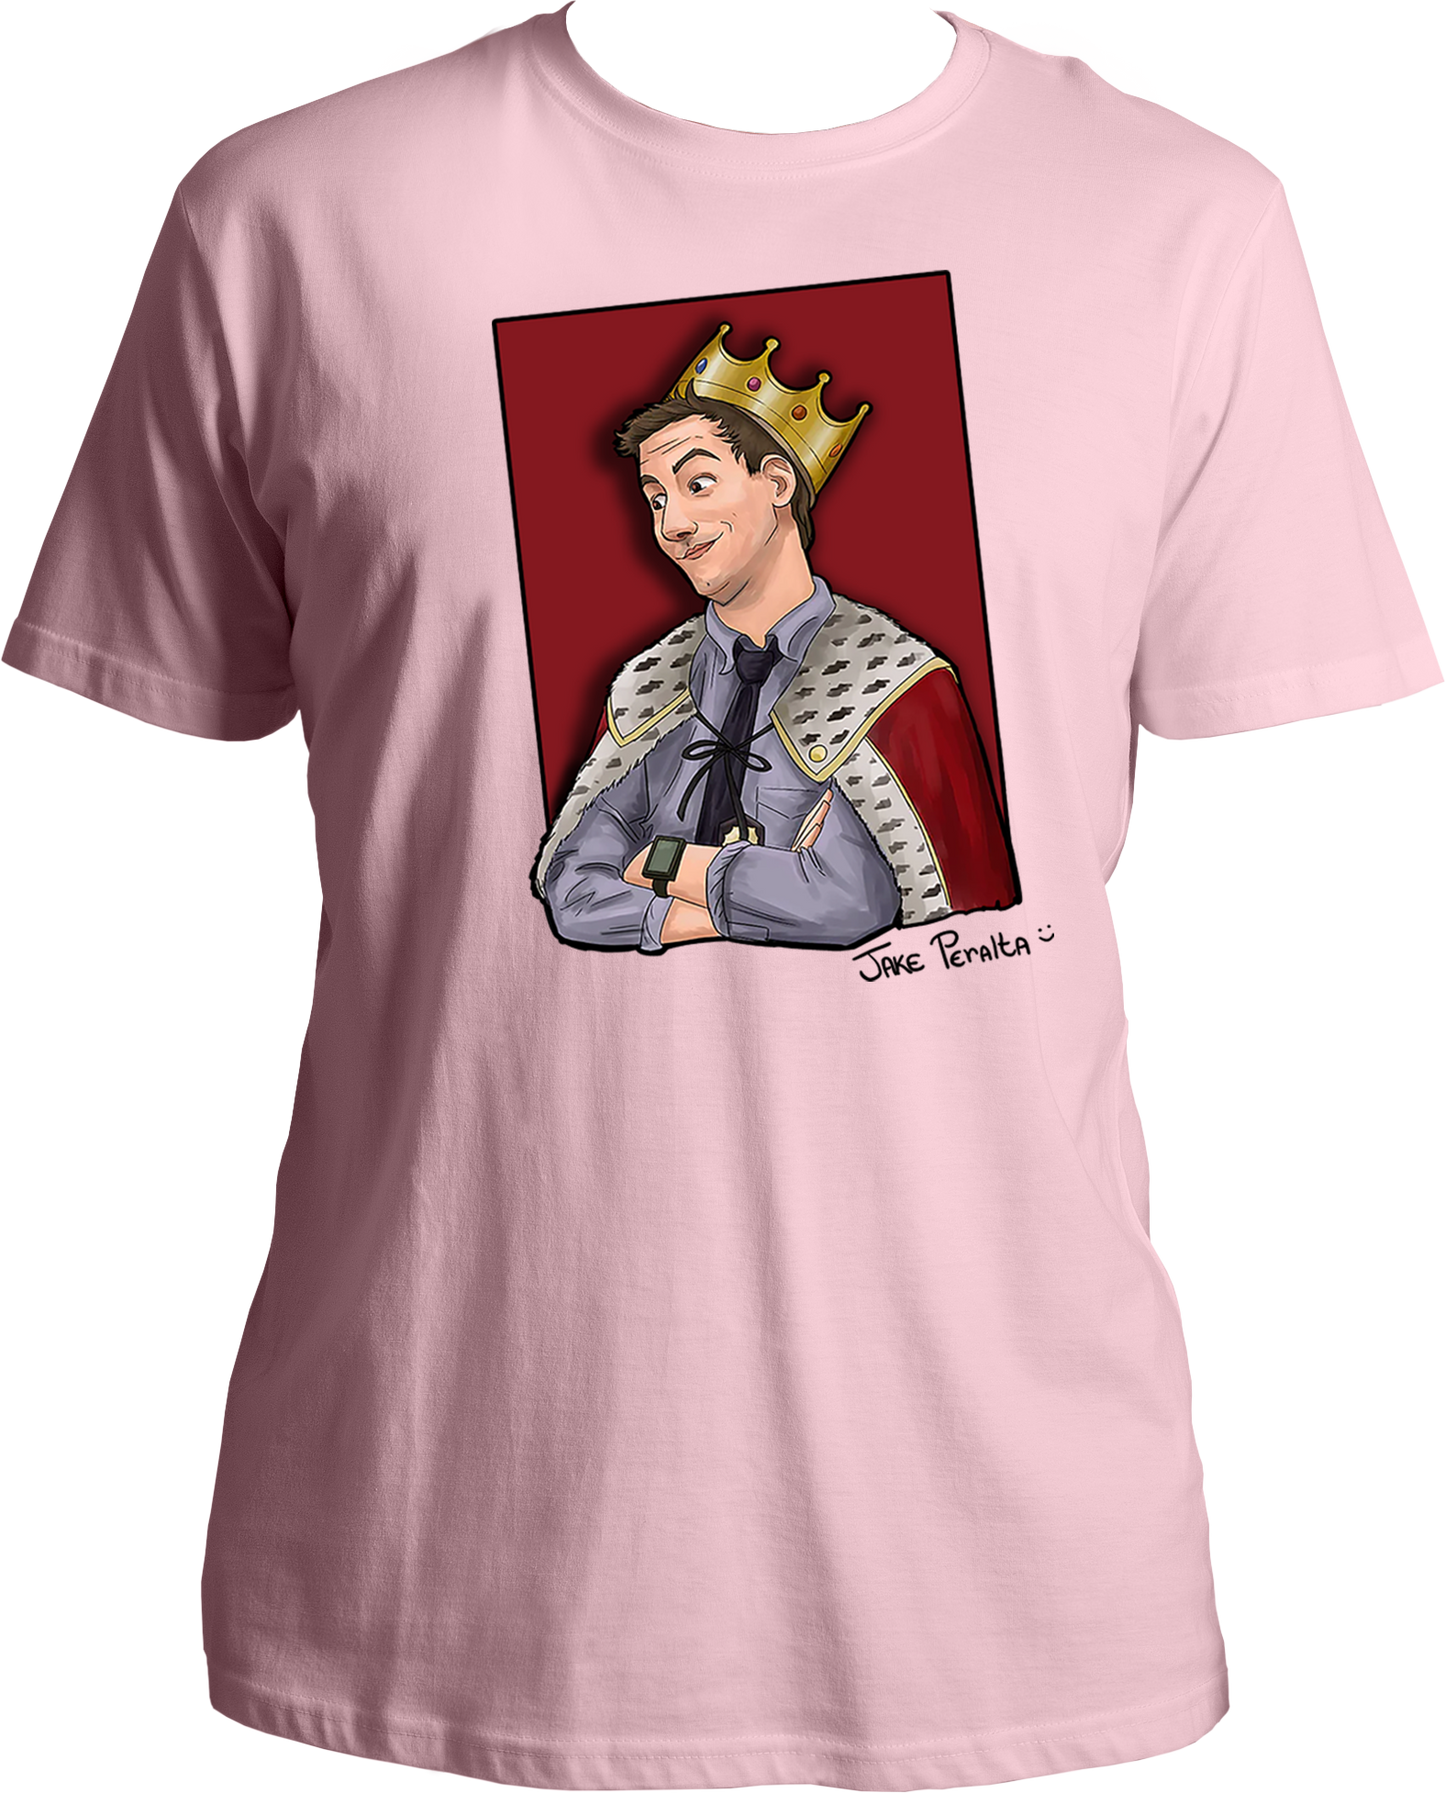 <p>Gear up like a true Nine-Nine fan and join the King Jake Peralta squad. These tees are not just apparel; they're a tribute to the laughter and camaraderie of Brooklyn Nine-Nine. Shop now and let the fun begin! 🌟 #BrooklynNineNine #KingJakePeralta #DetectiveHumor #UnisexFashion</p>